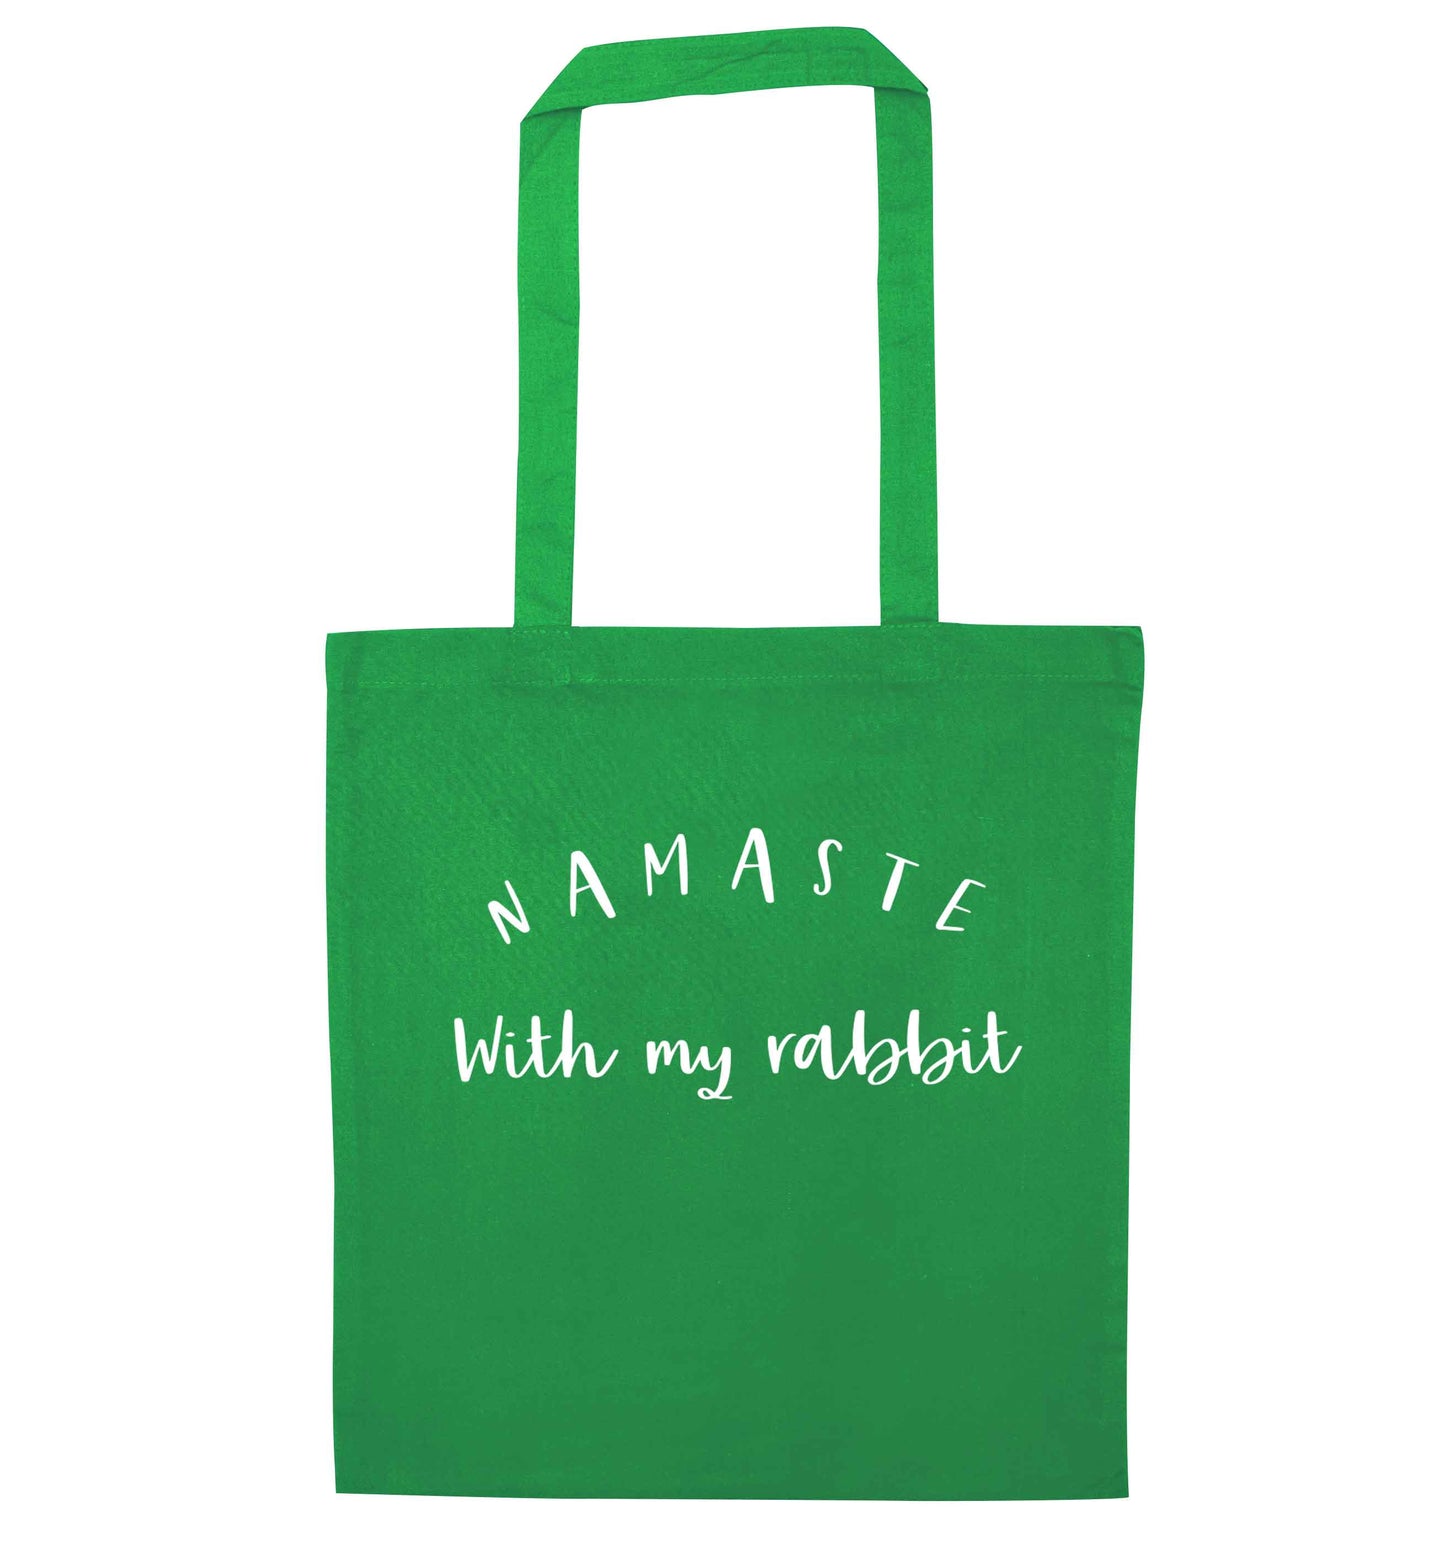 Namaste with my rabbit green tote bag